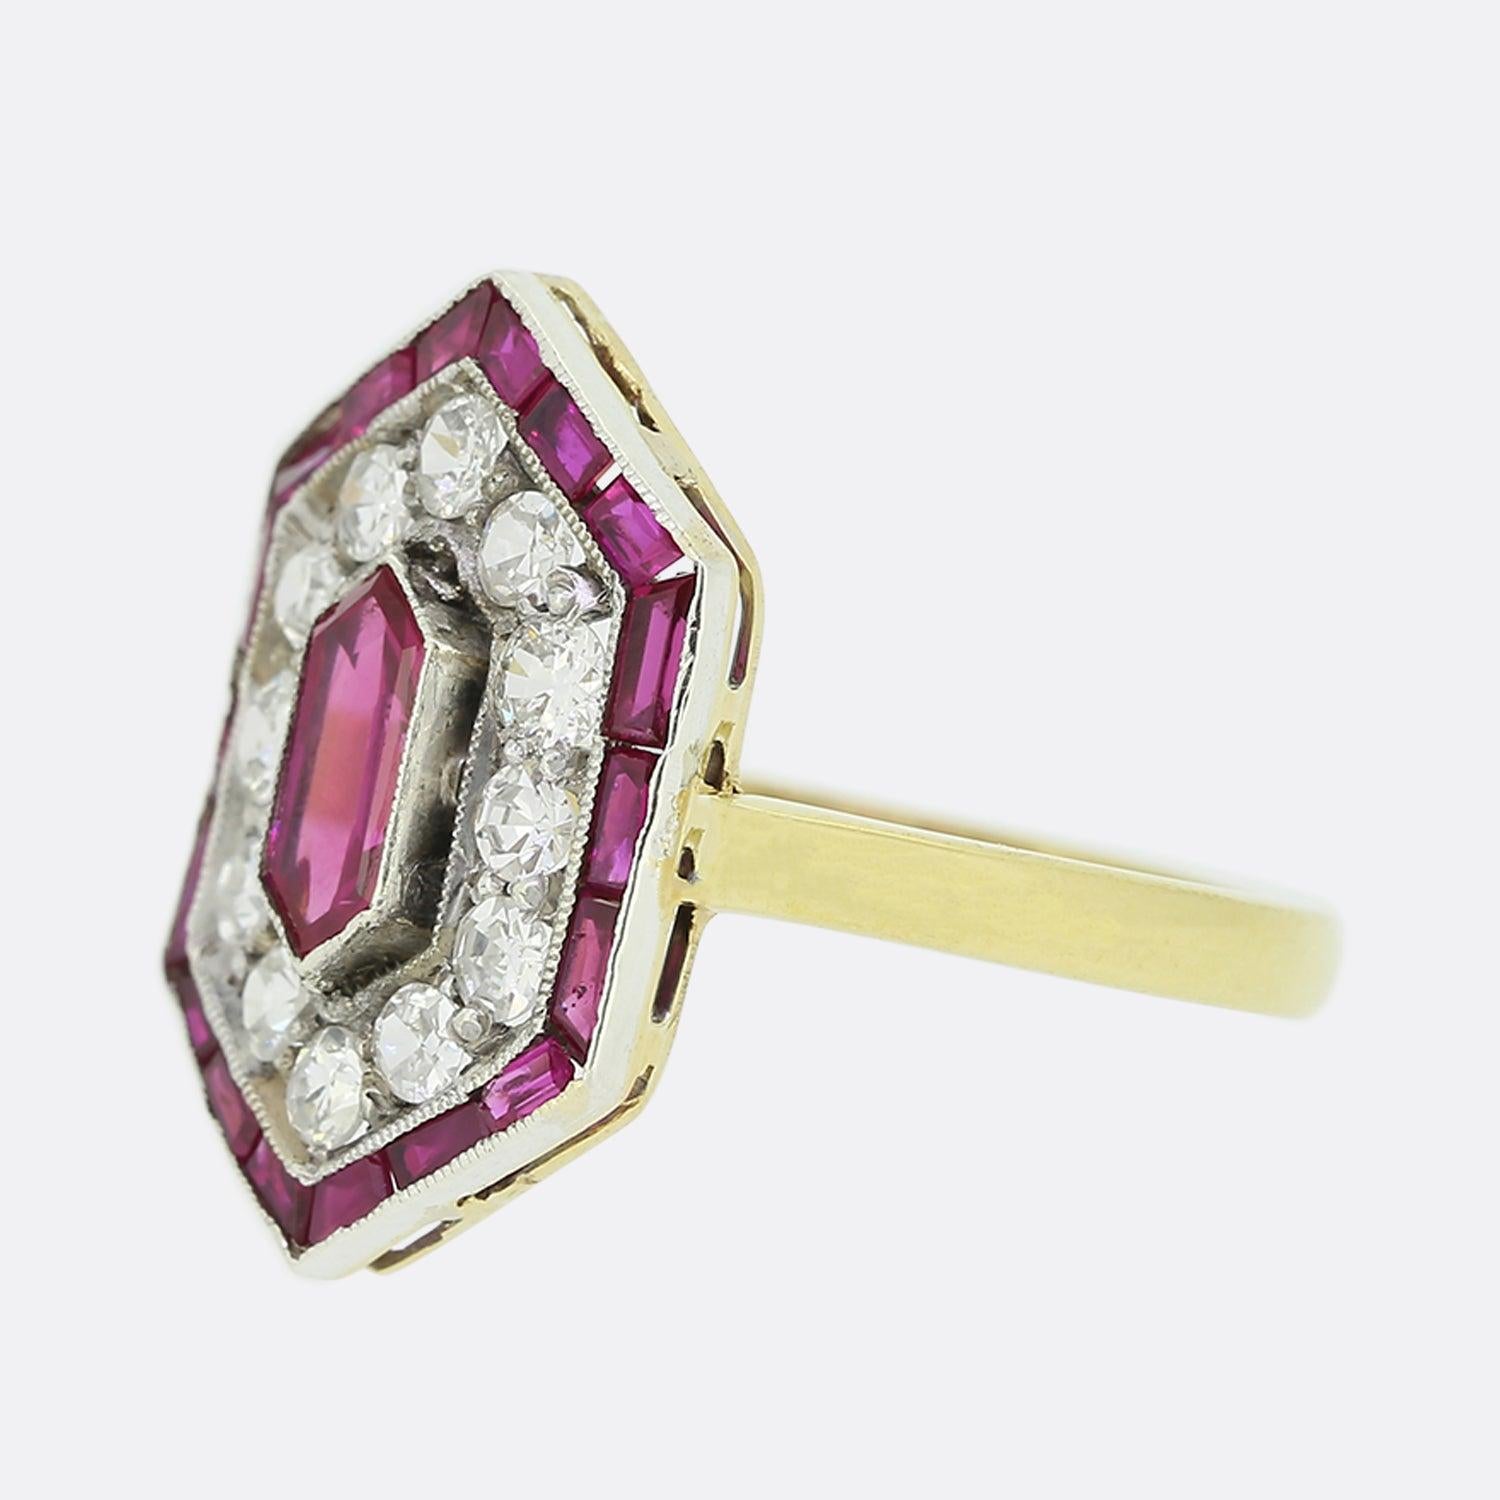 This is an Art Deco 18ct yellow gold ruby and diamond cluster ring. The ring has been crafted in a hexagonal shaped setting and is set with a central ruby which is surrounded by a halo of old and single cut diamonds and then a border of calibre cut